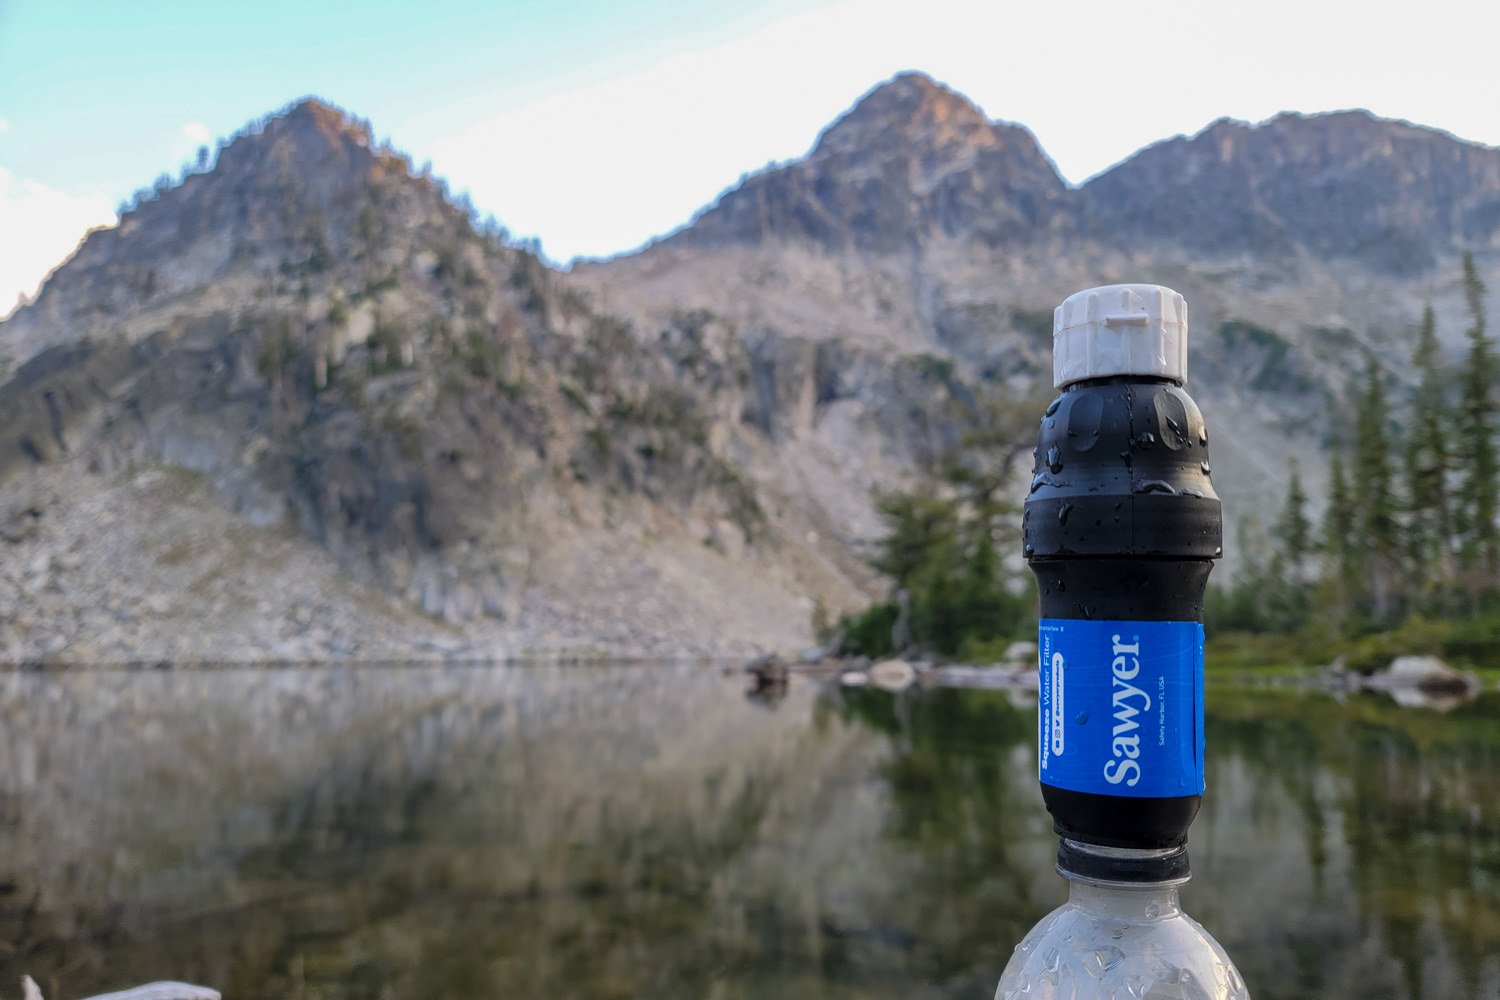 The Sawyer Squeeze Water Filter in front of granite peaks in the Wallowas.